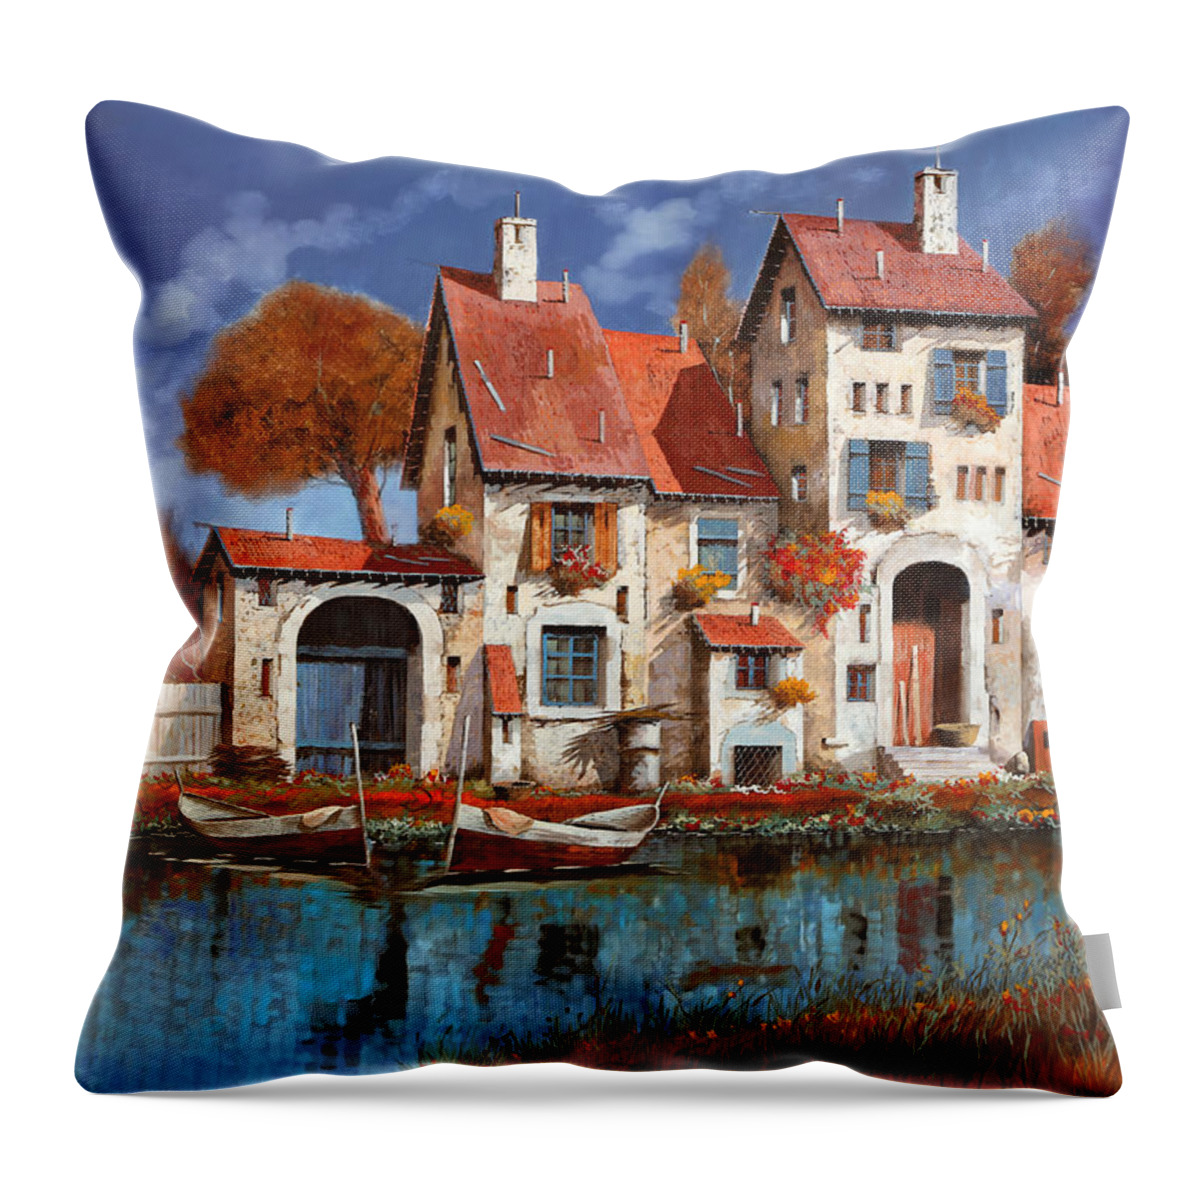 Little Village Throw Pillow featuring the painting La Cascina Sul Lago by Guido Borelli